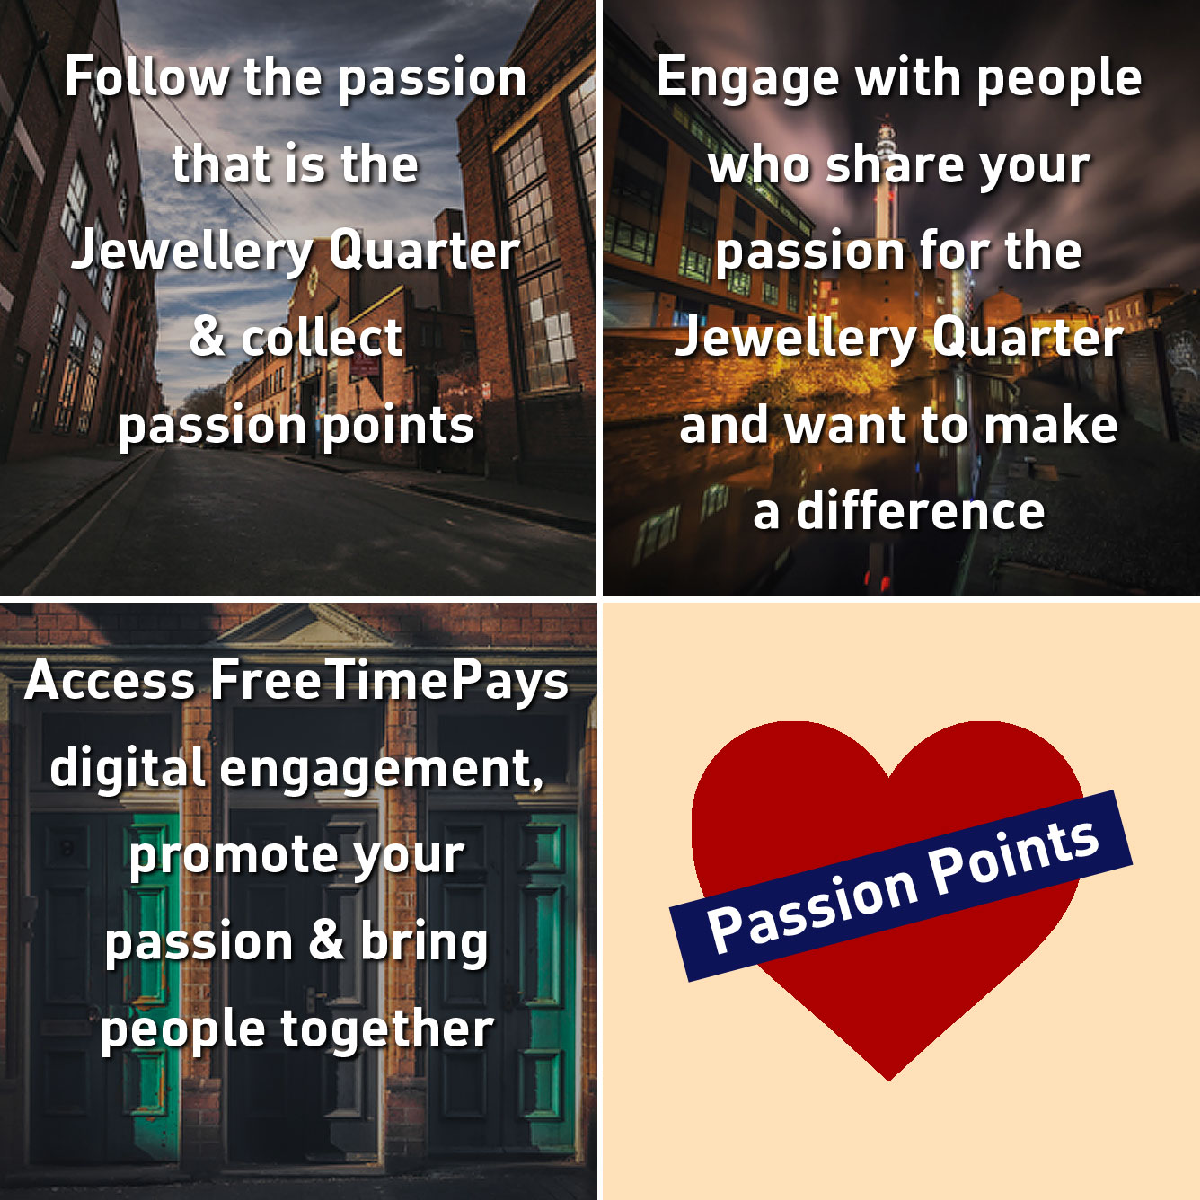 Are you passionate about the Jewellery Quarter? Join Us!